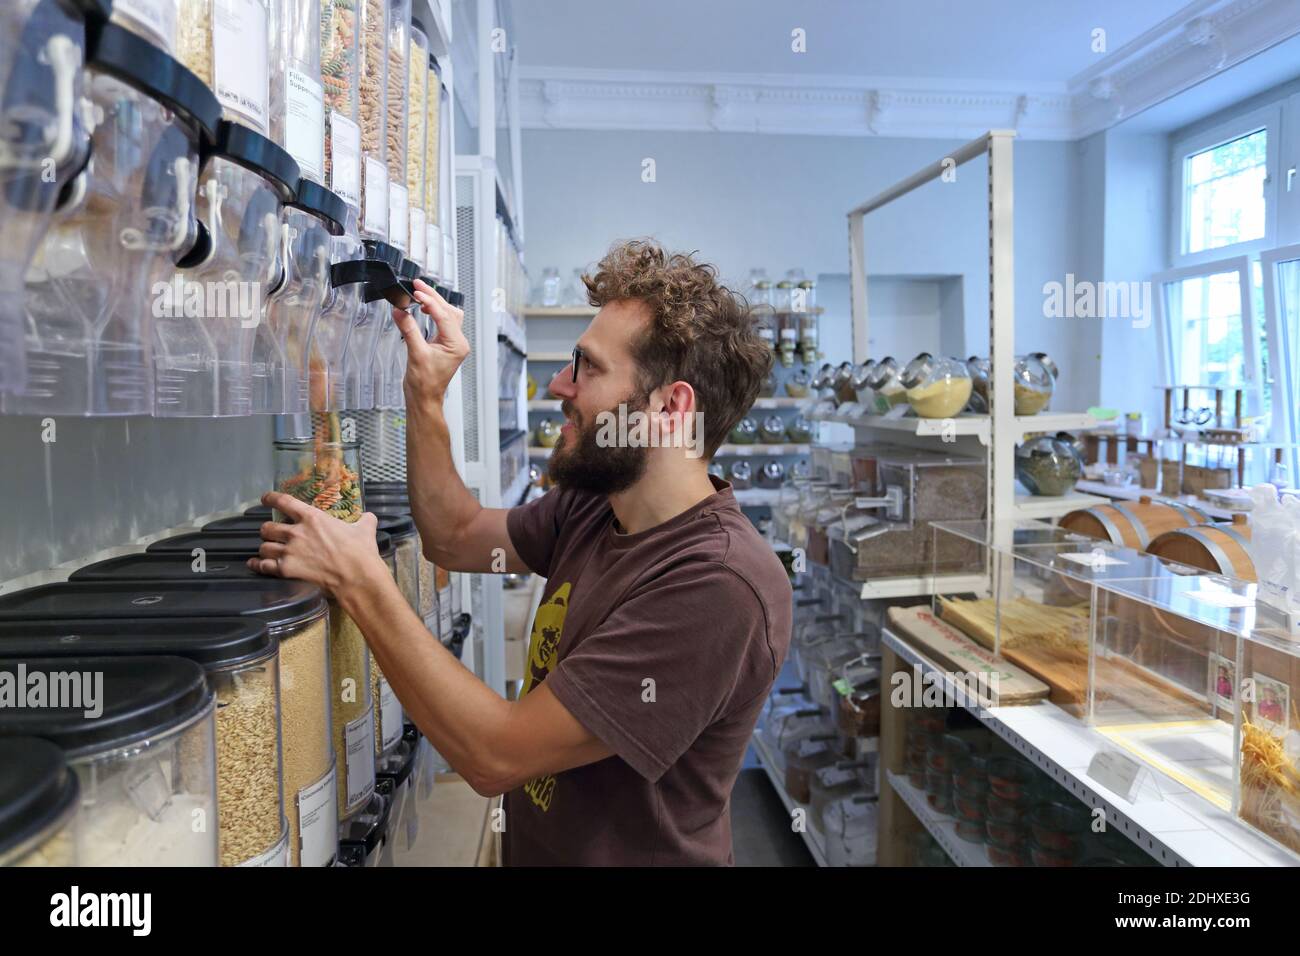 Germany / Berlin / Customers bring their own containers and fill them with anything from Pasta il to washing up liquid, at Original Unverpackt. Stock Photo